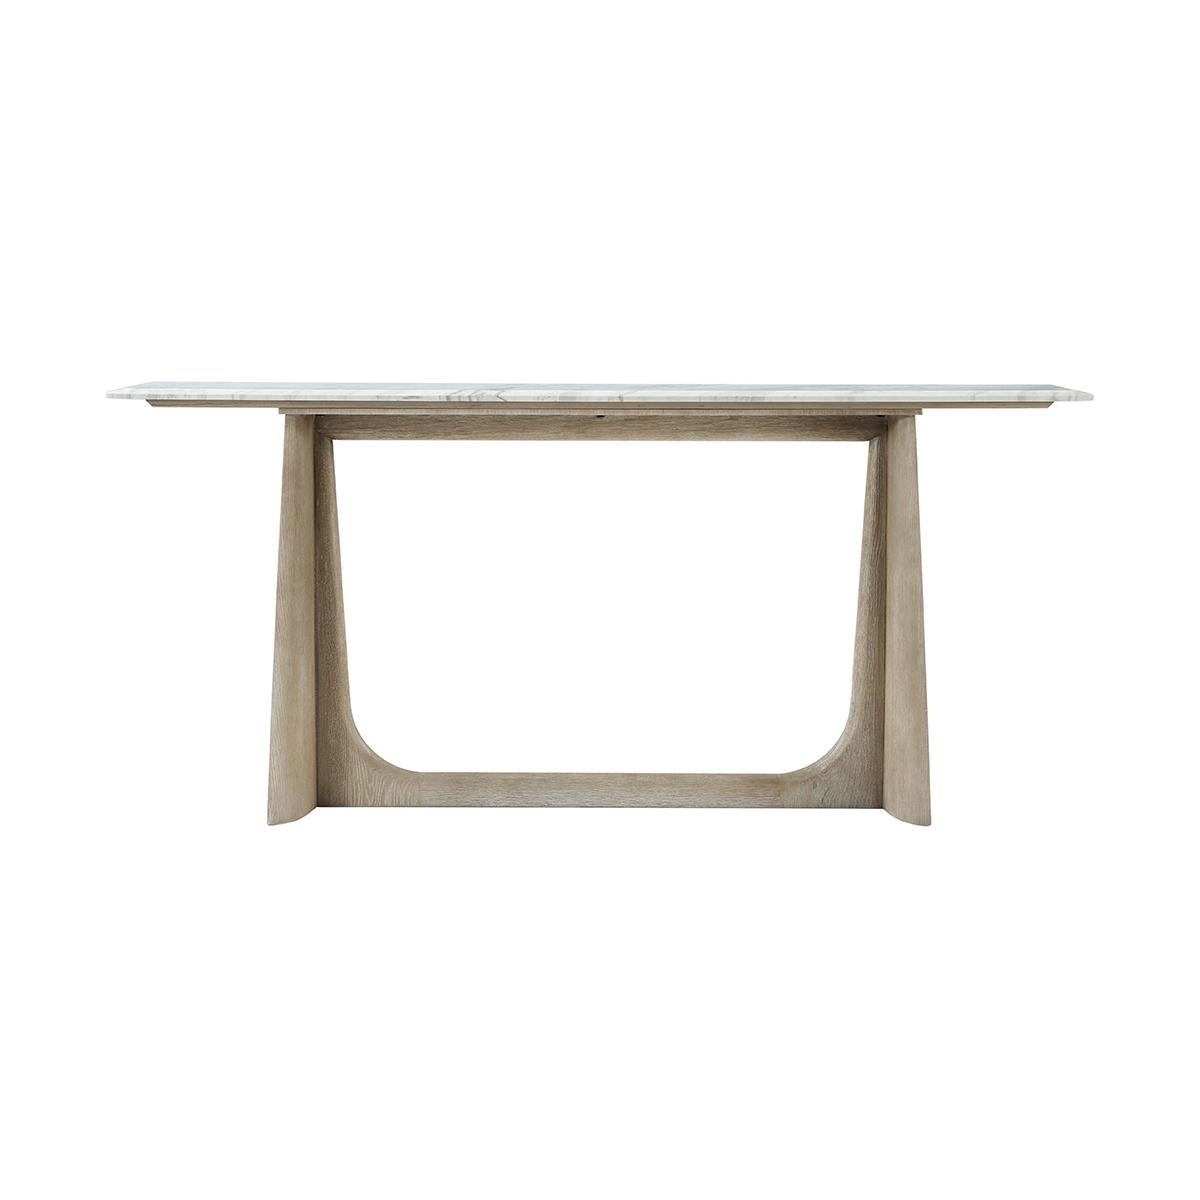 Featuring a wire-brushed white oak in our light grey oak finish. With a Volakas marble top raised on trapezoidal form trestle ends with a stretcher.

Dimensions: 72